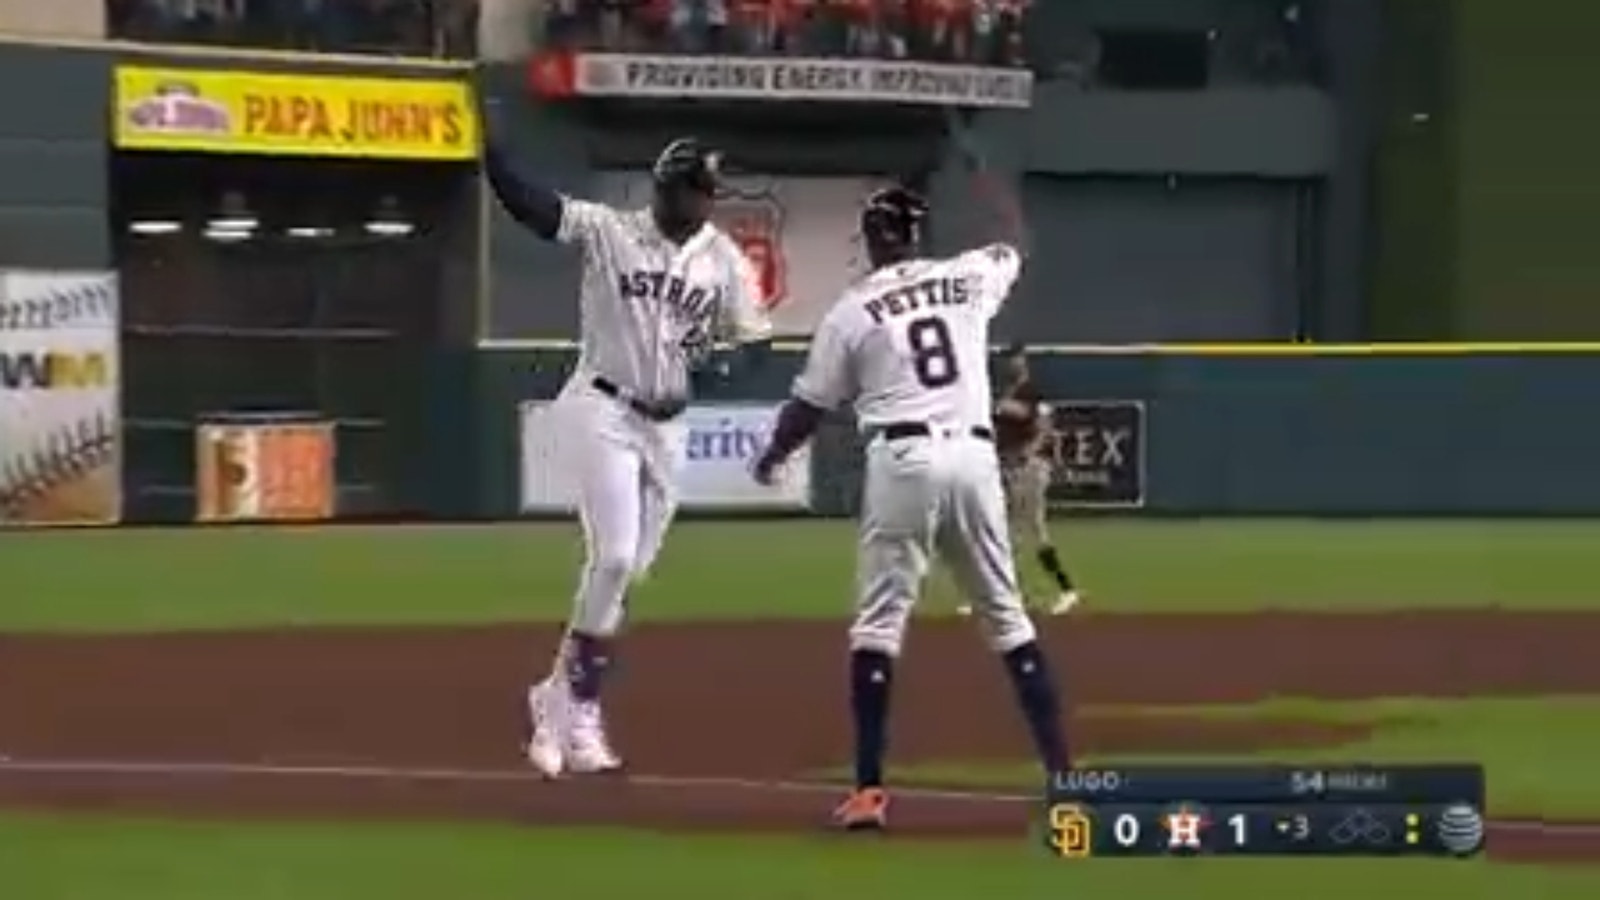 Yordan Alvarez knocks solo home run to give Astros early lead over Padres